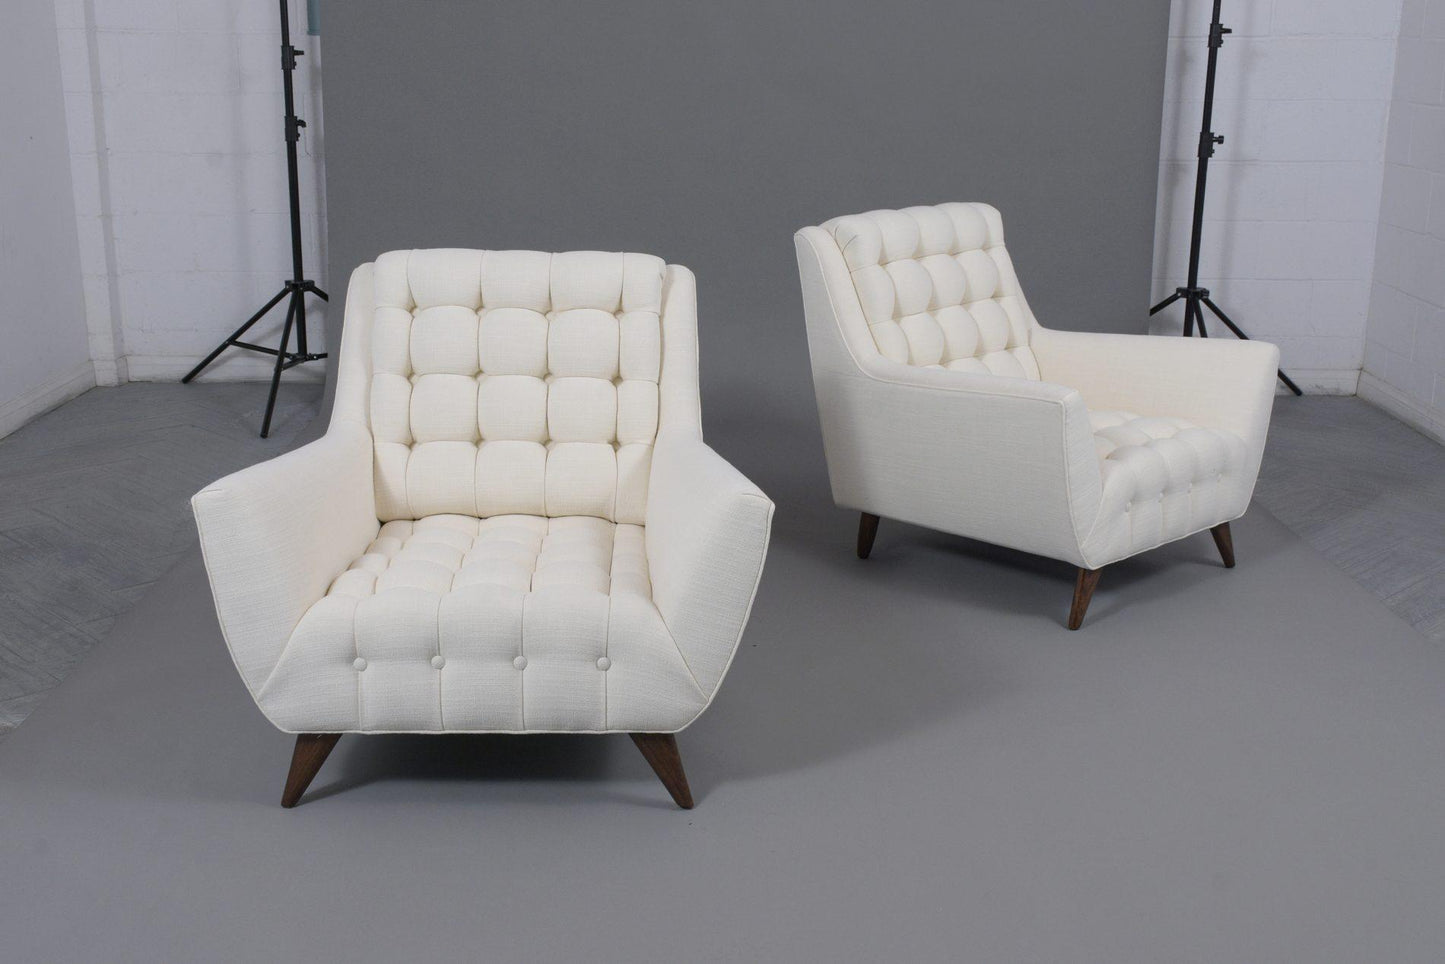 Restored Adrian Pearsall-Style Mid-Century Modern Lounge Chairs in Oyster Fabric